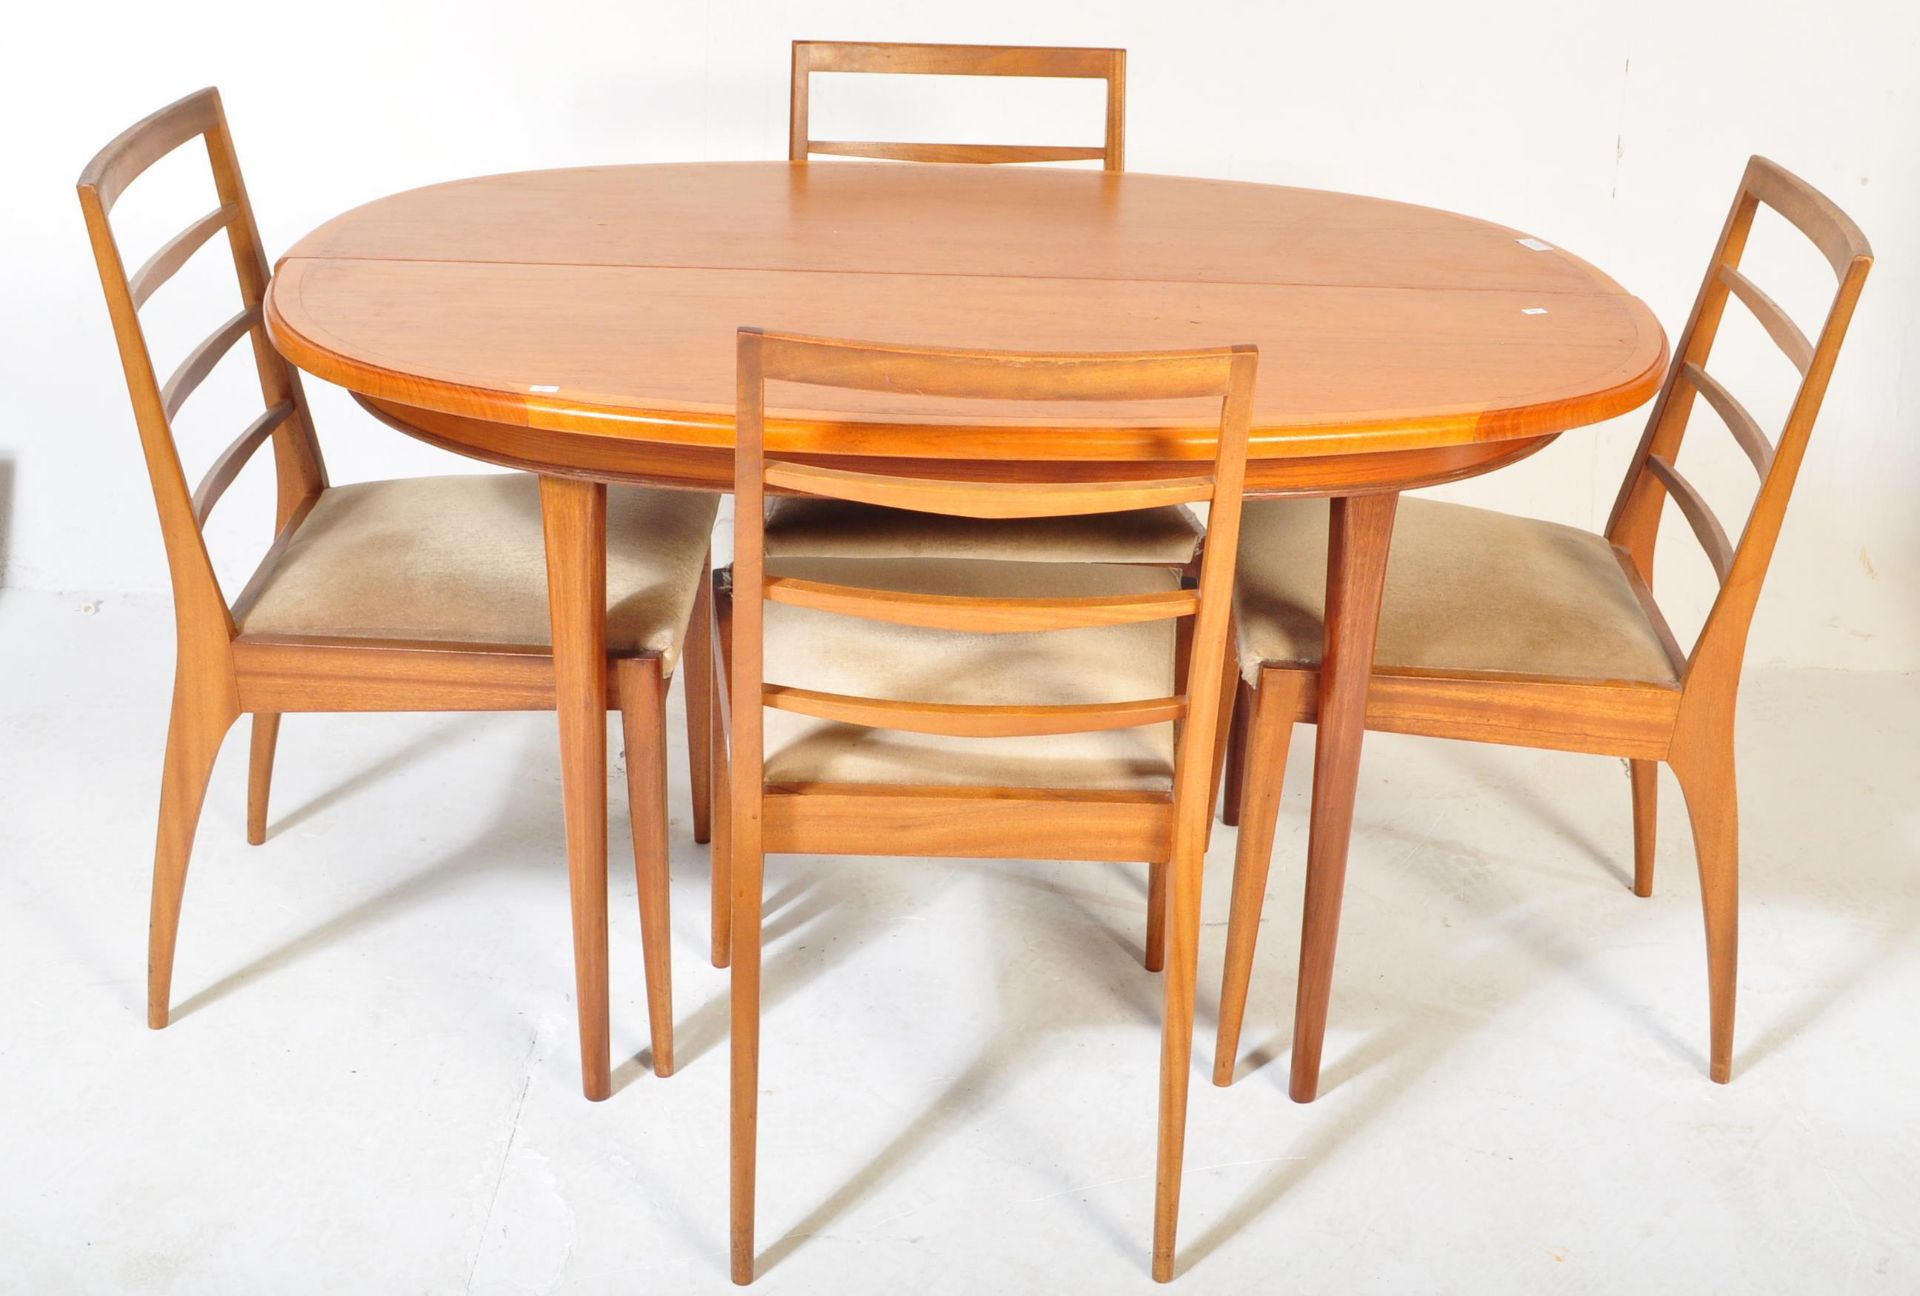 MID 20TH CENTURY TEAK DINING TABLE & FOUR CHAIRS - Image 2 of 5